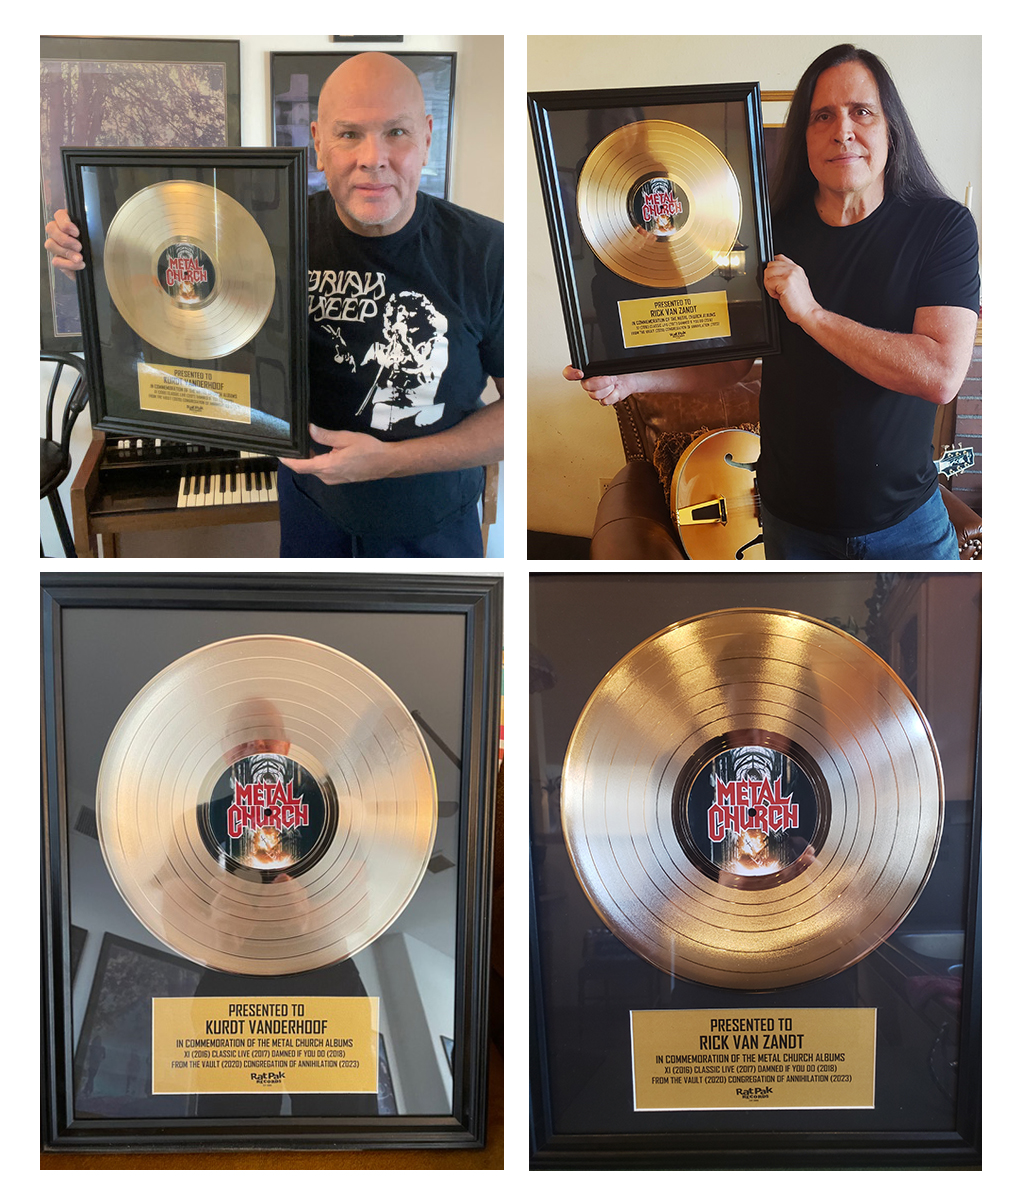 Rick and I with our commemorative Metal Church plaques, compliments of our good friends at Rat Pak Records! Looking forward to writing some new metal music with Rick in the very near future! #RatPakRecords